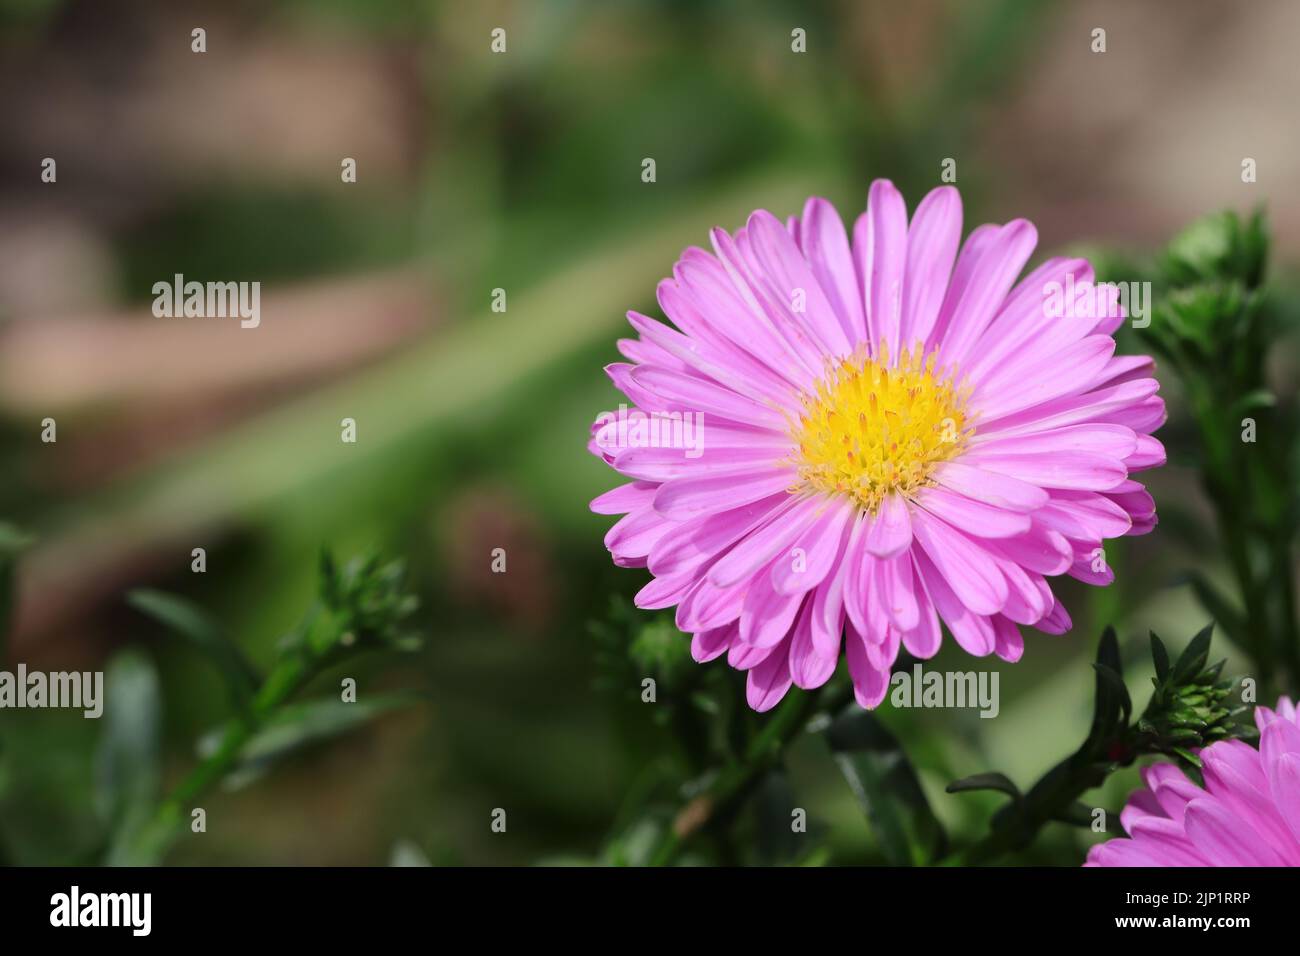 a beautiful single purple flowering aster against a blurry background, copy space Stock Photo